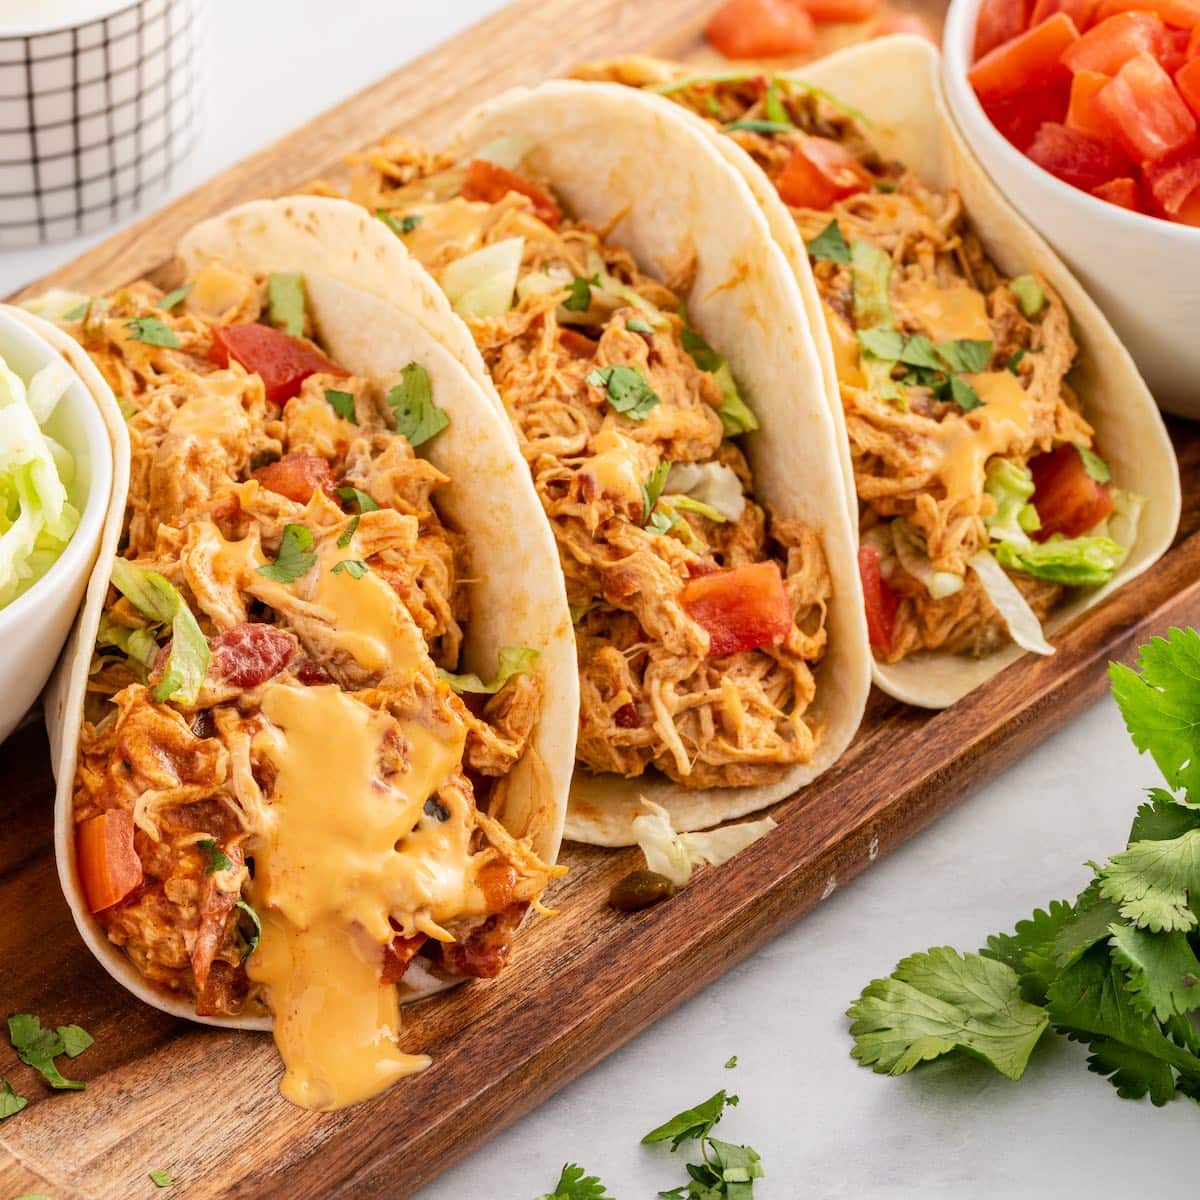 https://princesspinkygirl.com/wp-content/uploads/2022/02/slow-cooker-queso-chicken-tacos-39sq1200.jpg